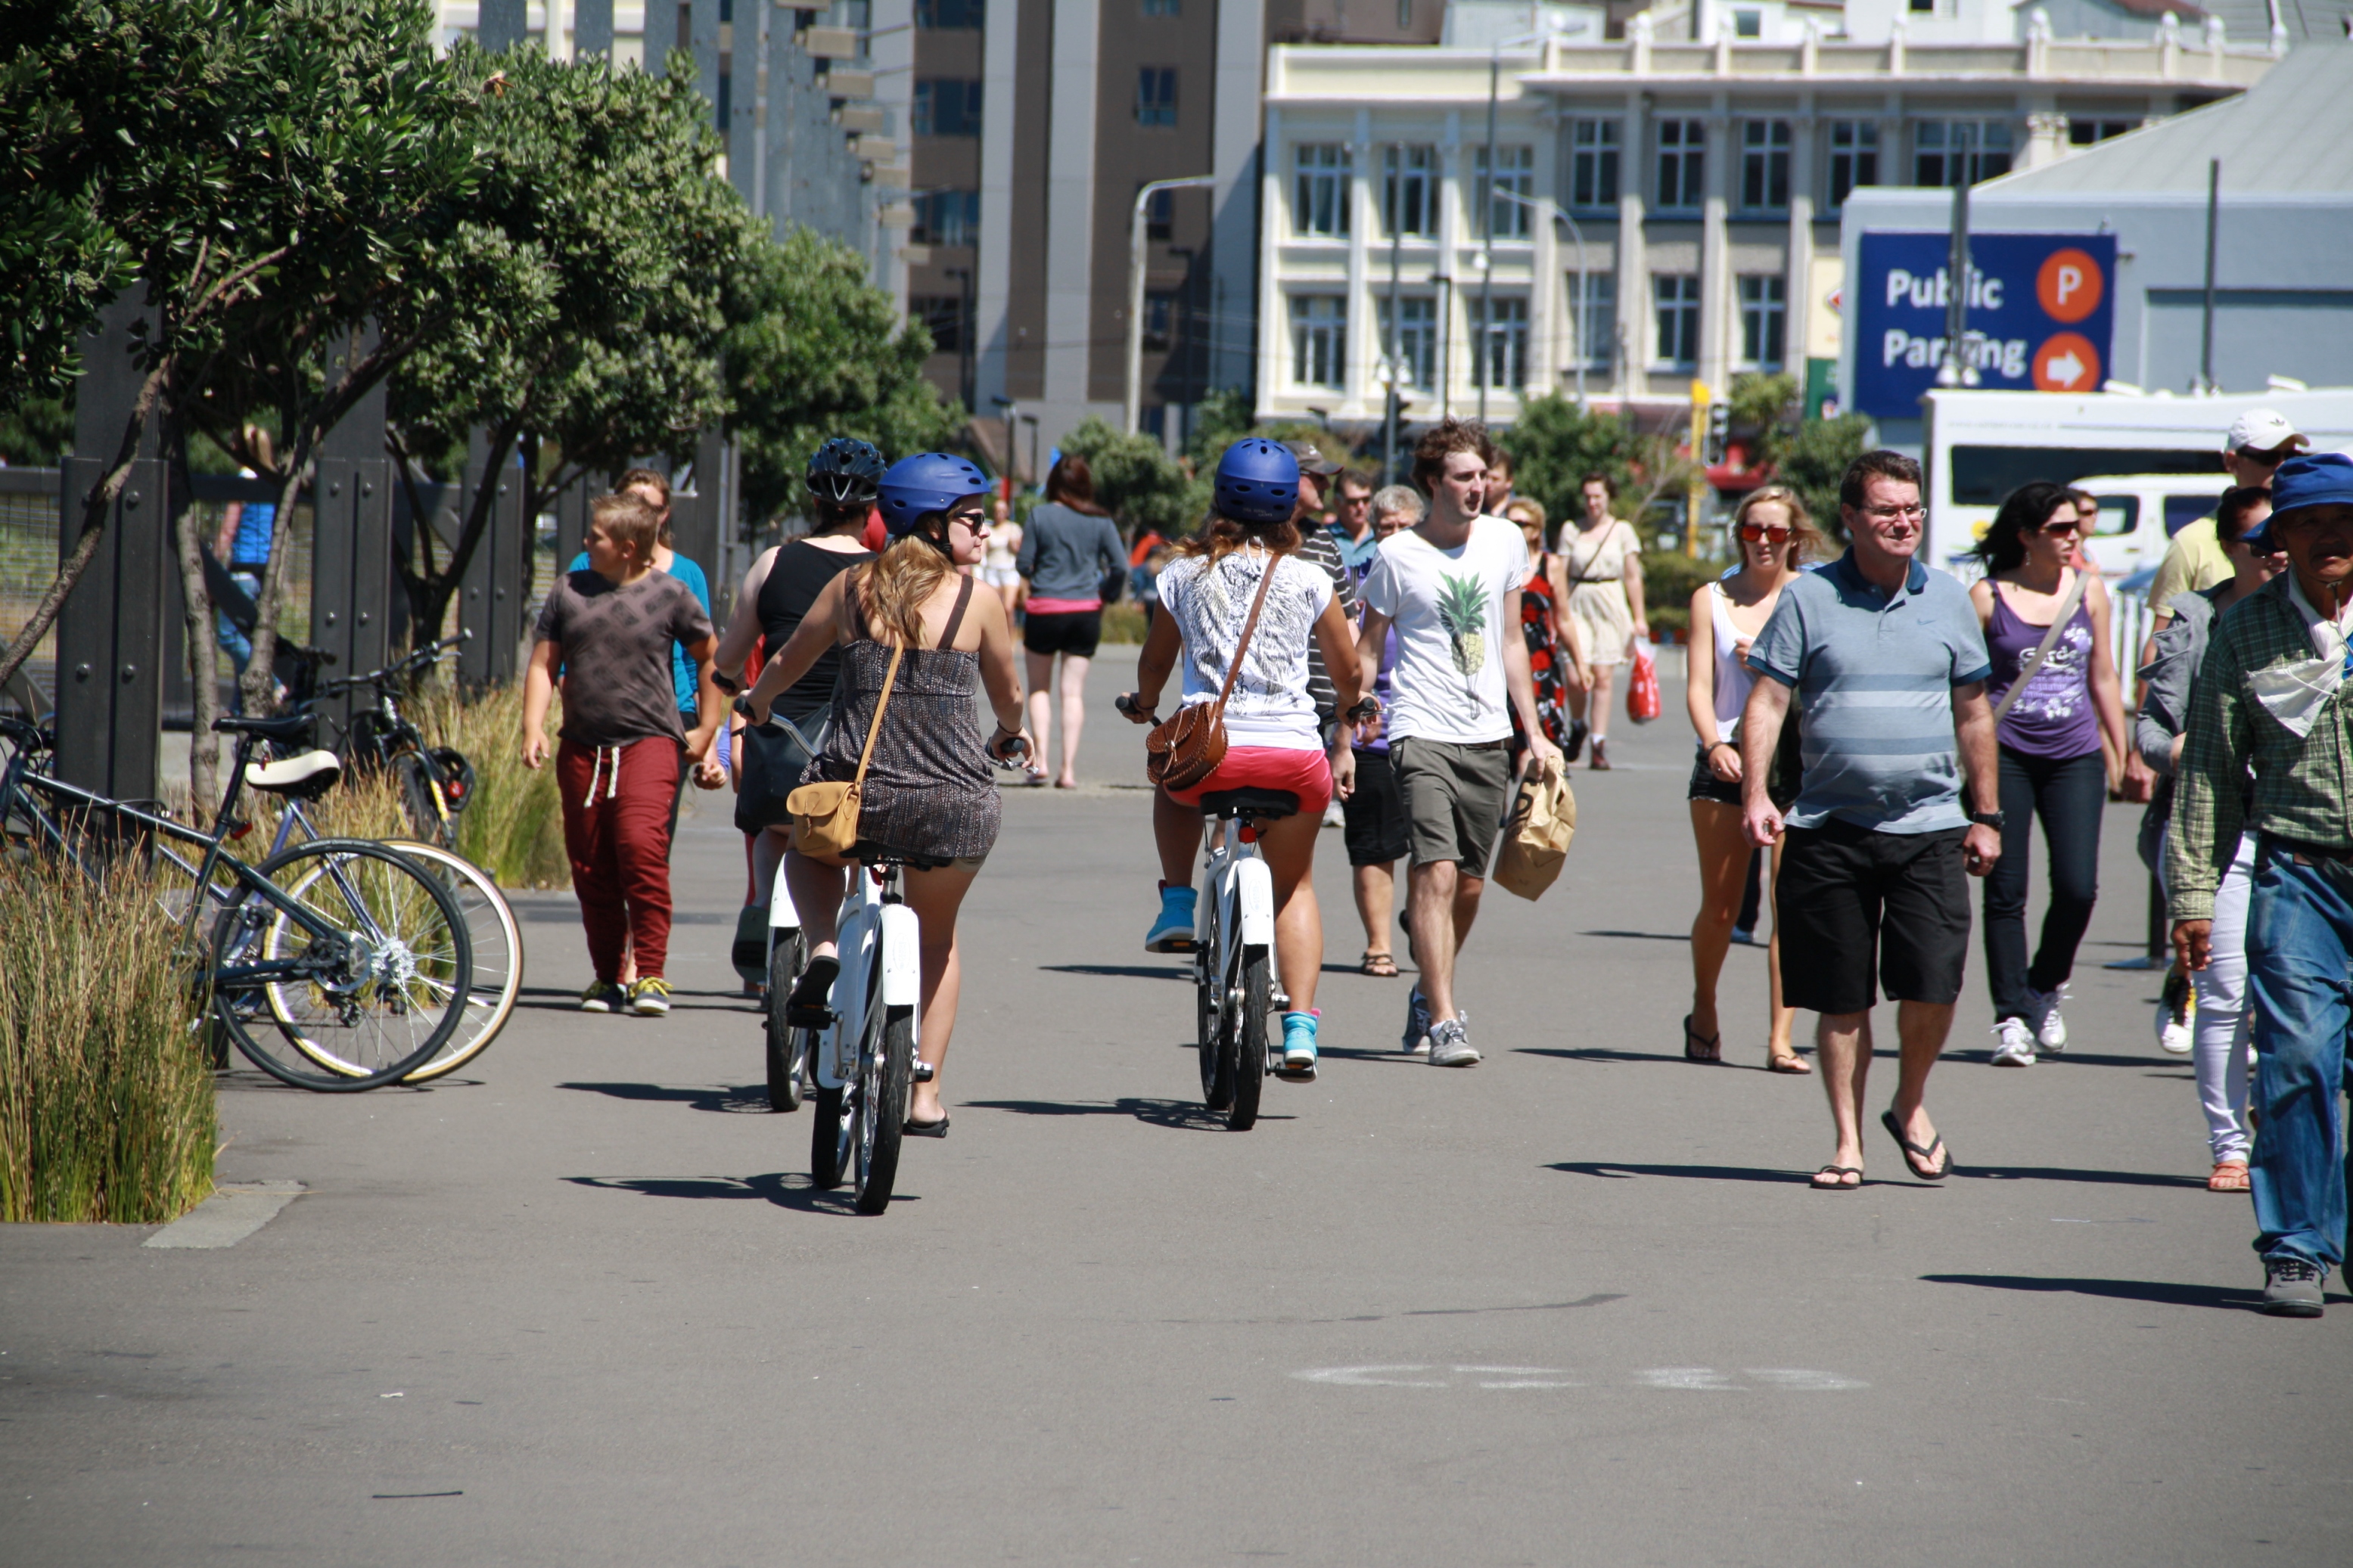 Cyclists and pedestrians enjoy the waterfront in harmony